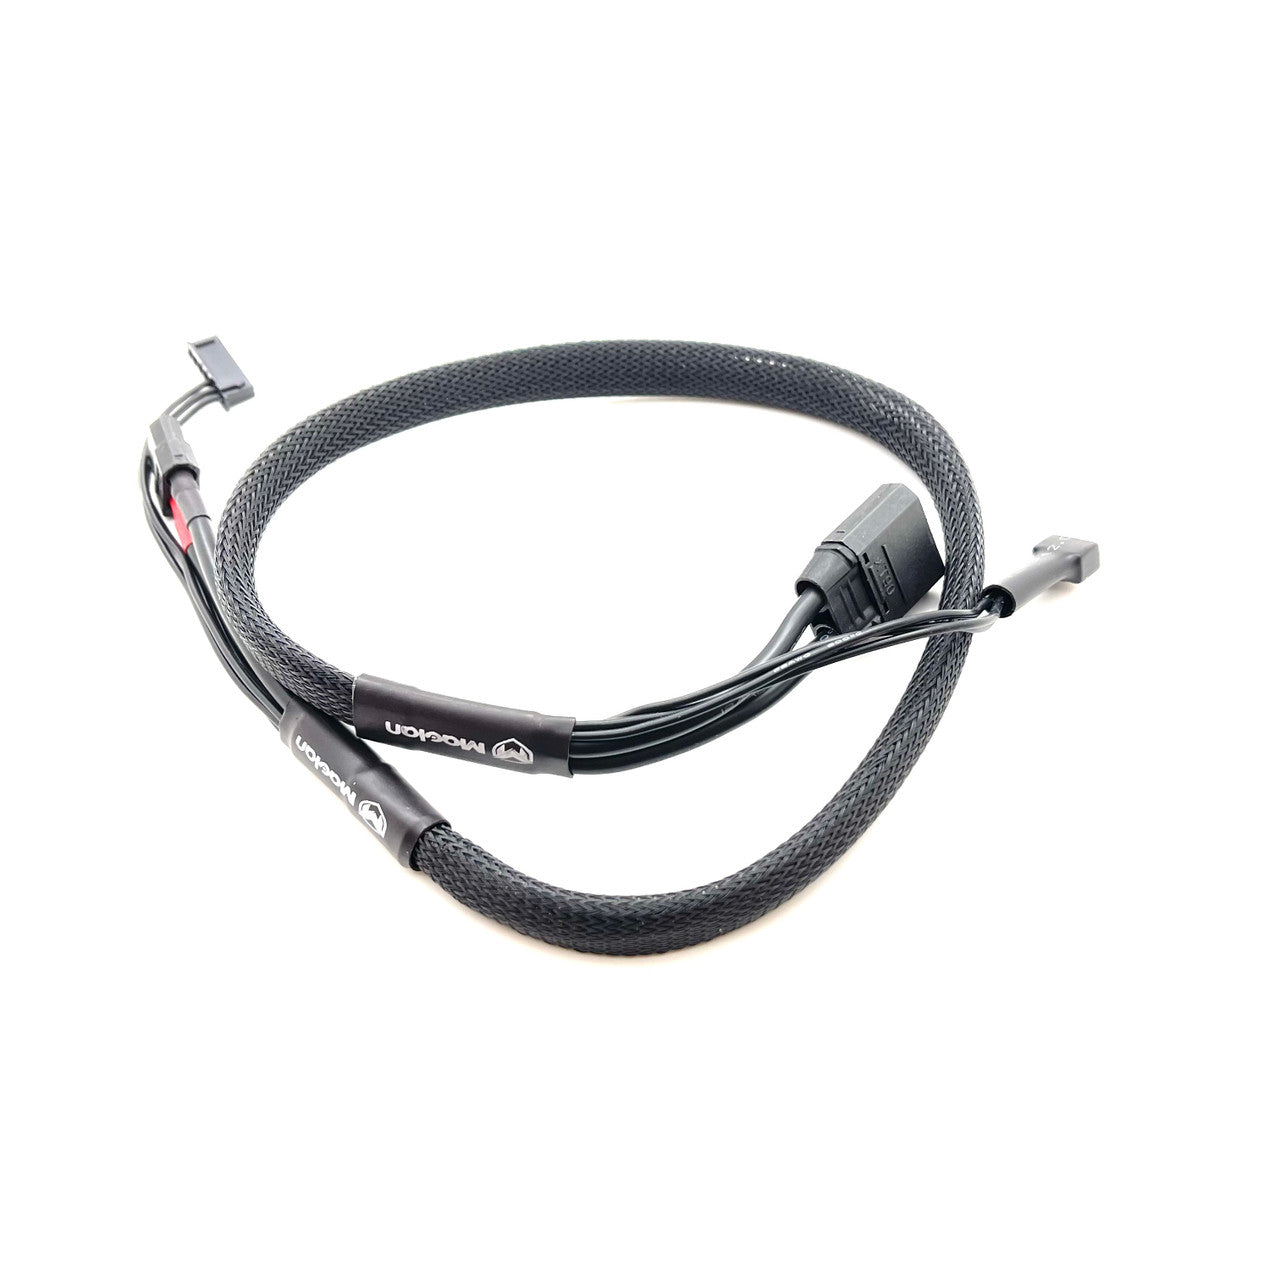 Maclan Max Current 2S (for XT90 battery) Charge Cable.